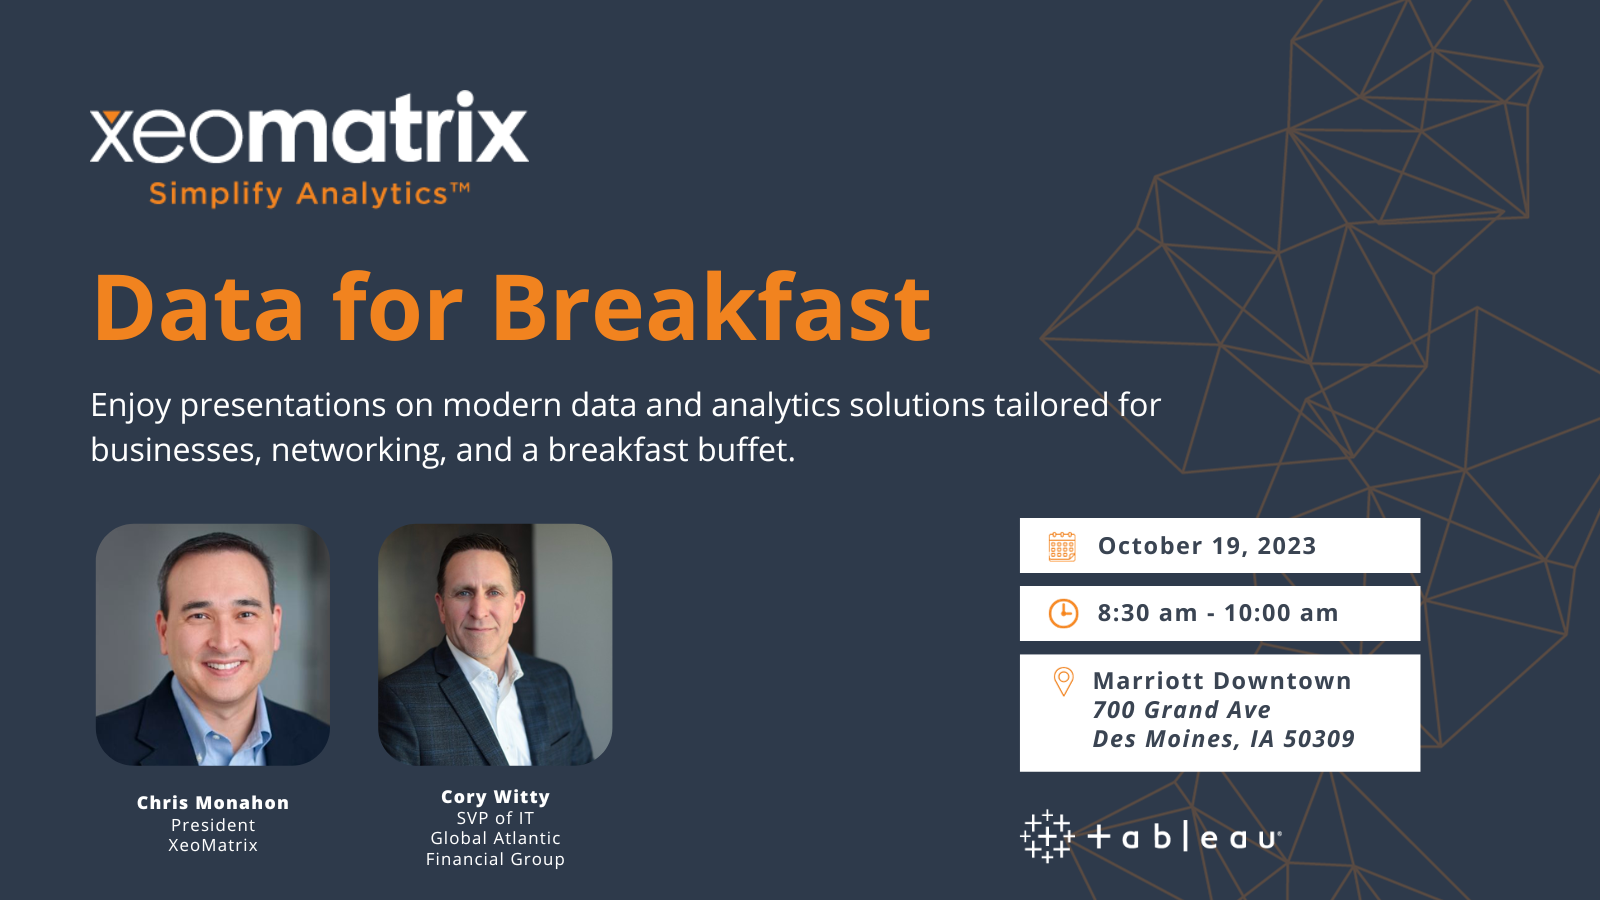 XeoMatrix Data for Breakfast. Enjoy presentations on modern data and analytics solutions tailored for businesses, networking, and a breakfast buffet. October 19, 2023. 8:30-10:00 AM. Marriot Downtown, 700 Grand Ave, Des Moines IA, 50309.